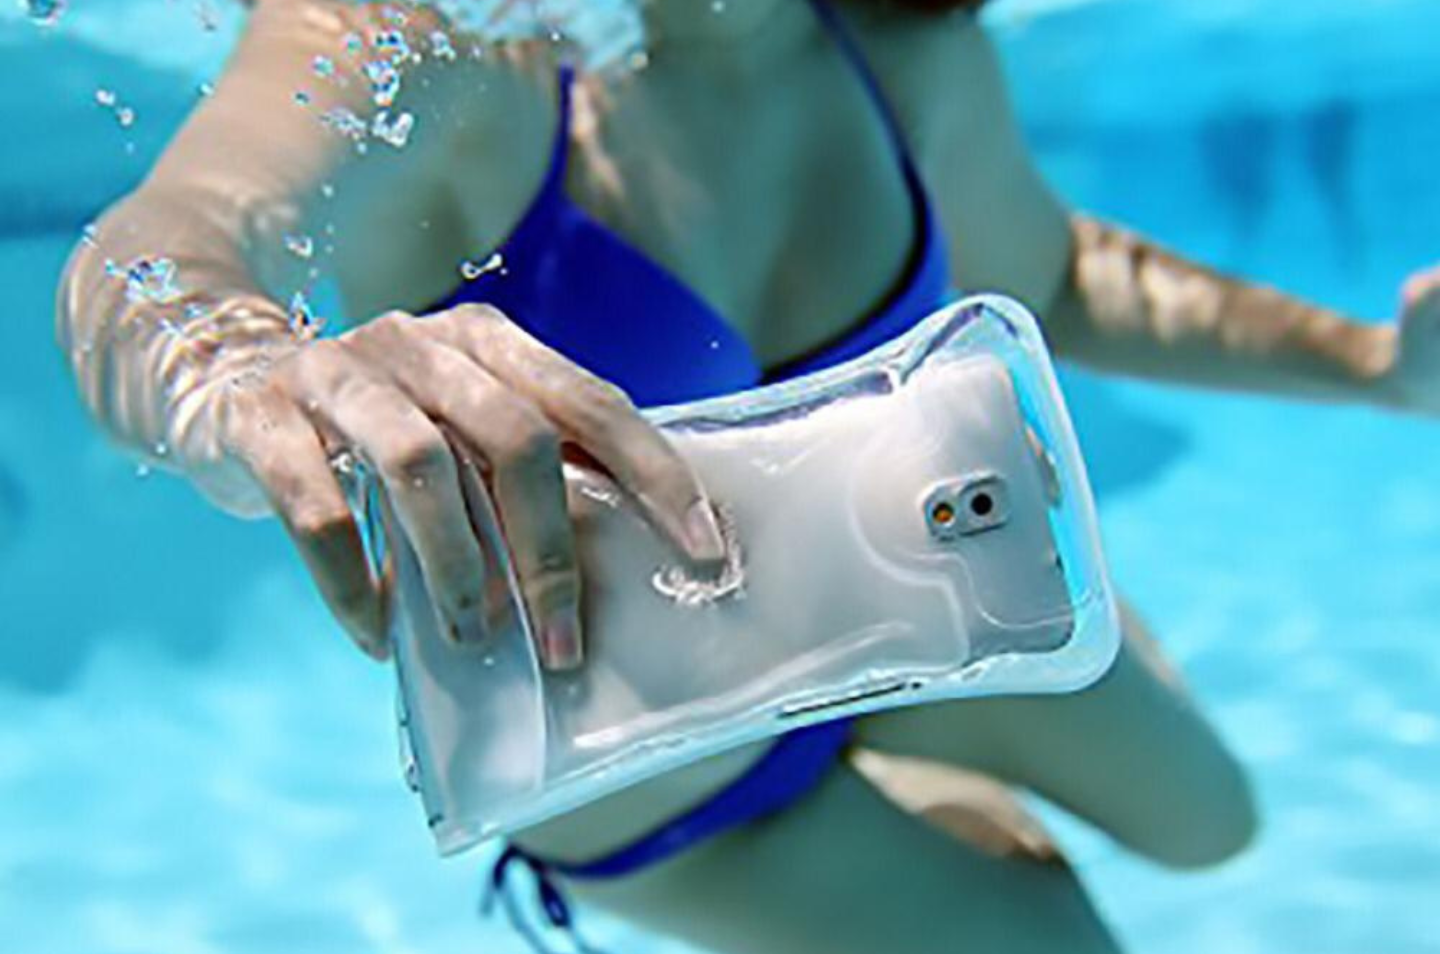 Miami Herald Review: AquaVault Waterproof Phone Case Ranked Best Overall